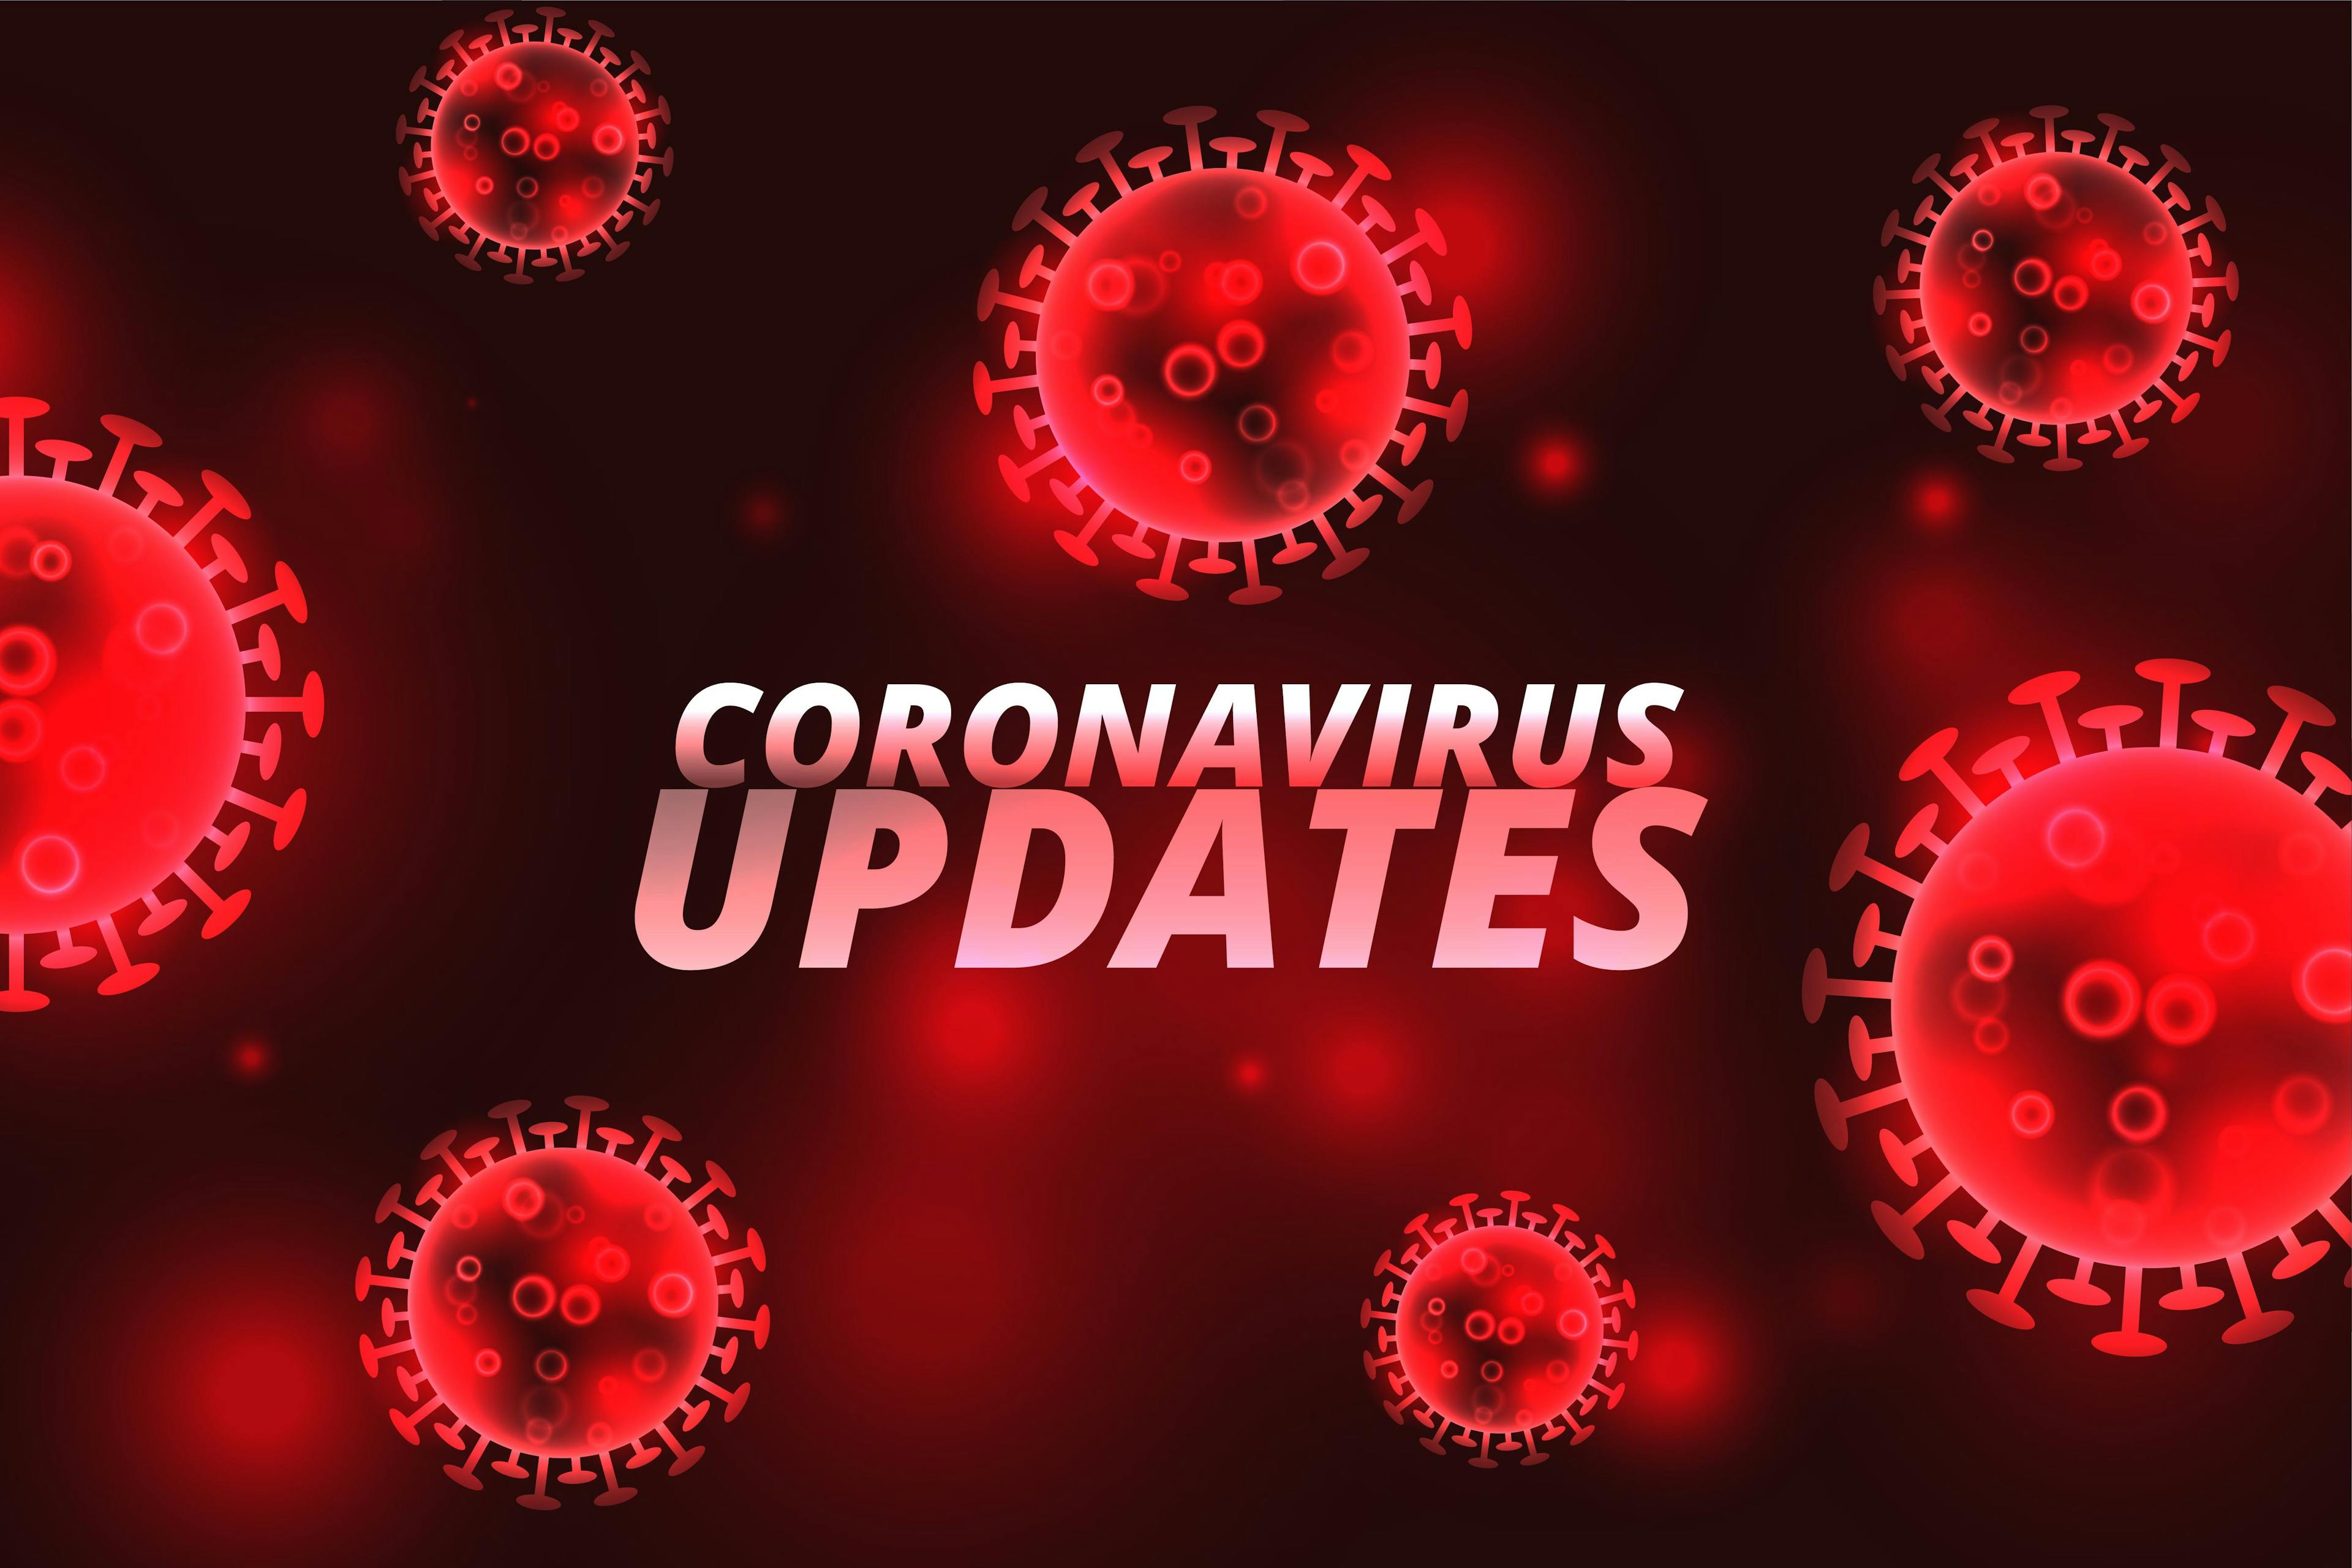 COVID-19 Updates: US Vaccinations and Global Cases and Deaths as of June 24, 2021